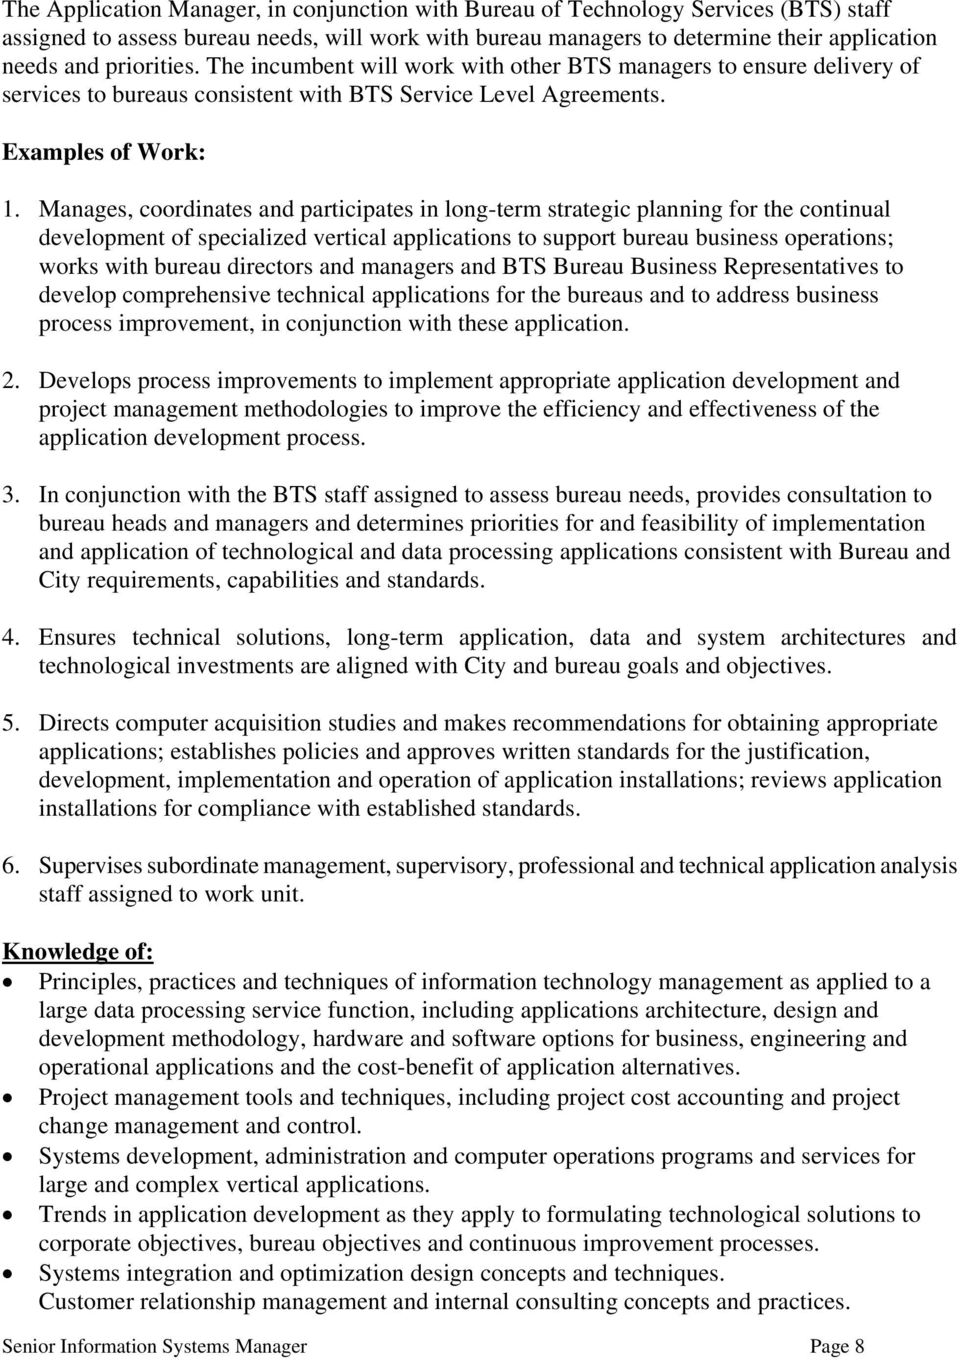 Manages, coordinates and participates in long-term strategic planning for the continual development of specialized vertical applications to support bureau business operations; works with bureau